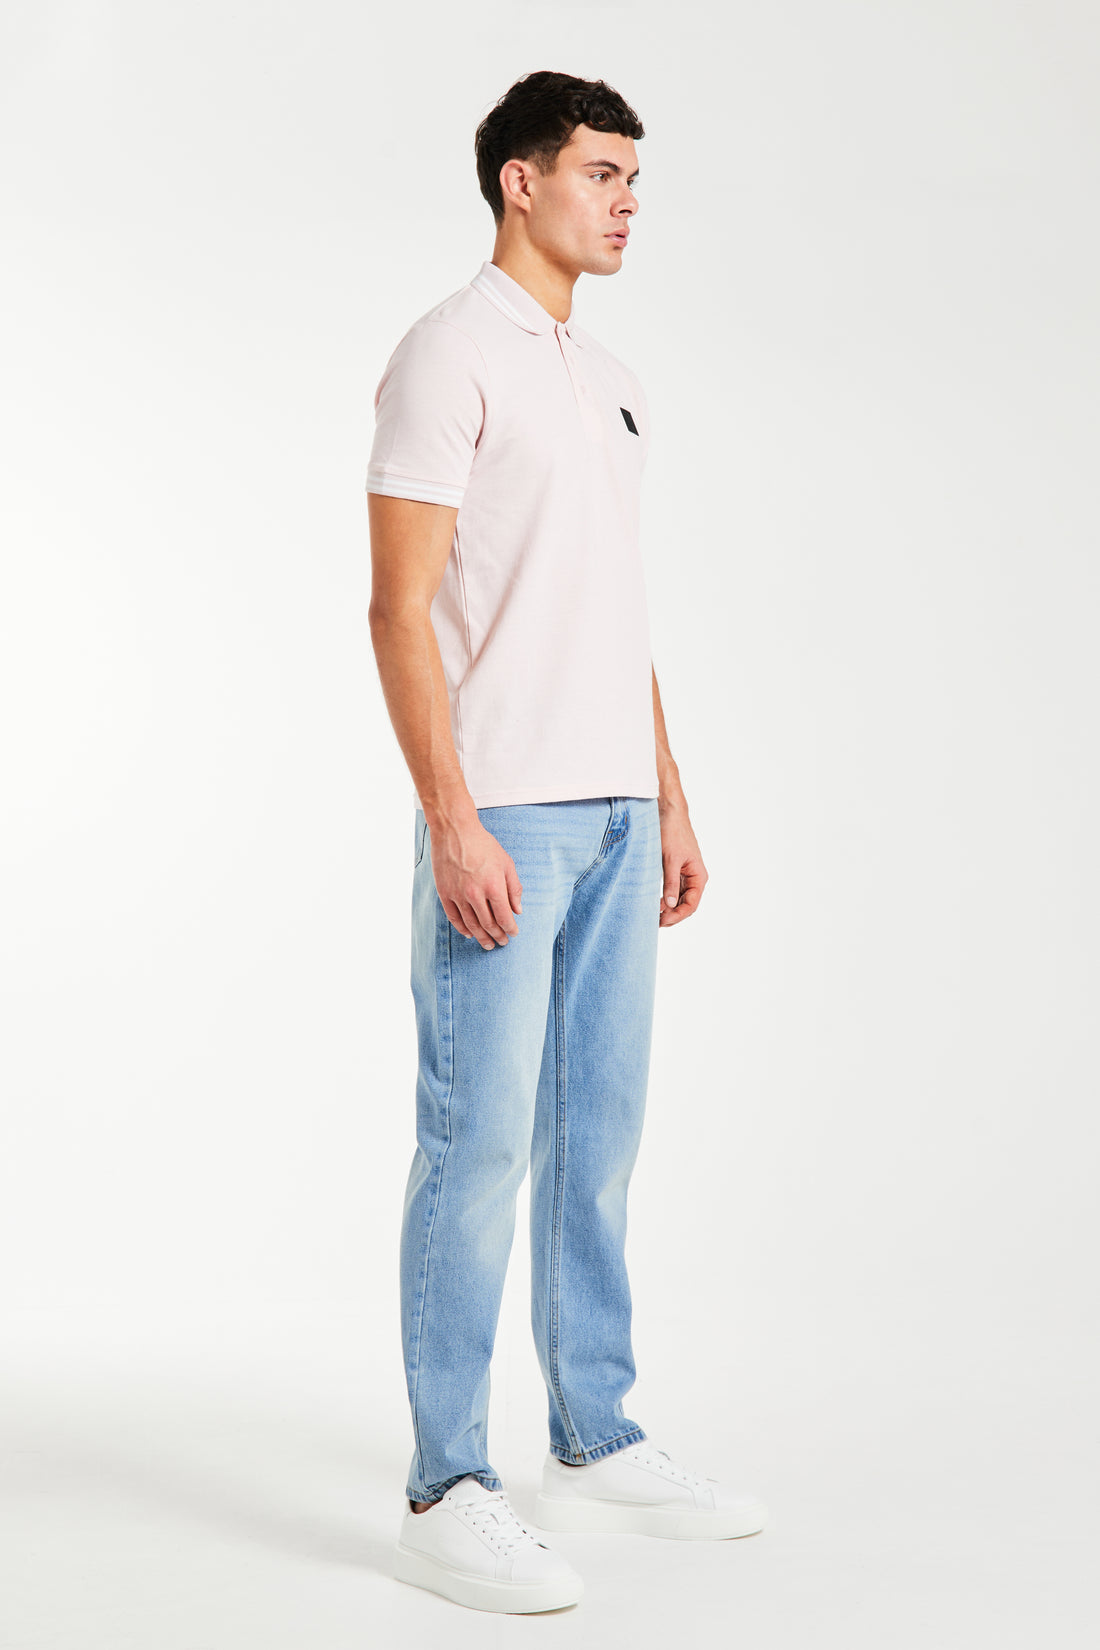 mens cheap polo shirts in pink